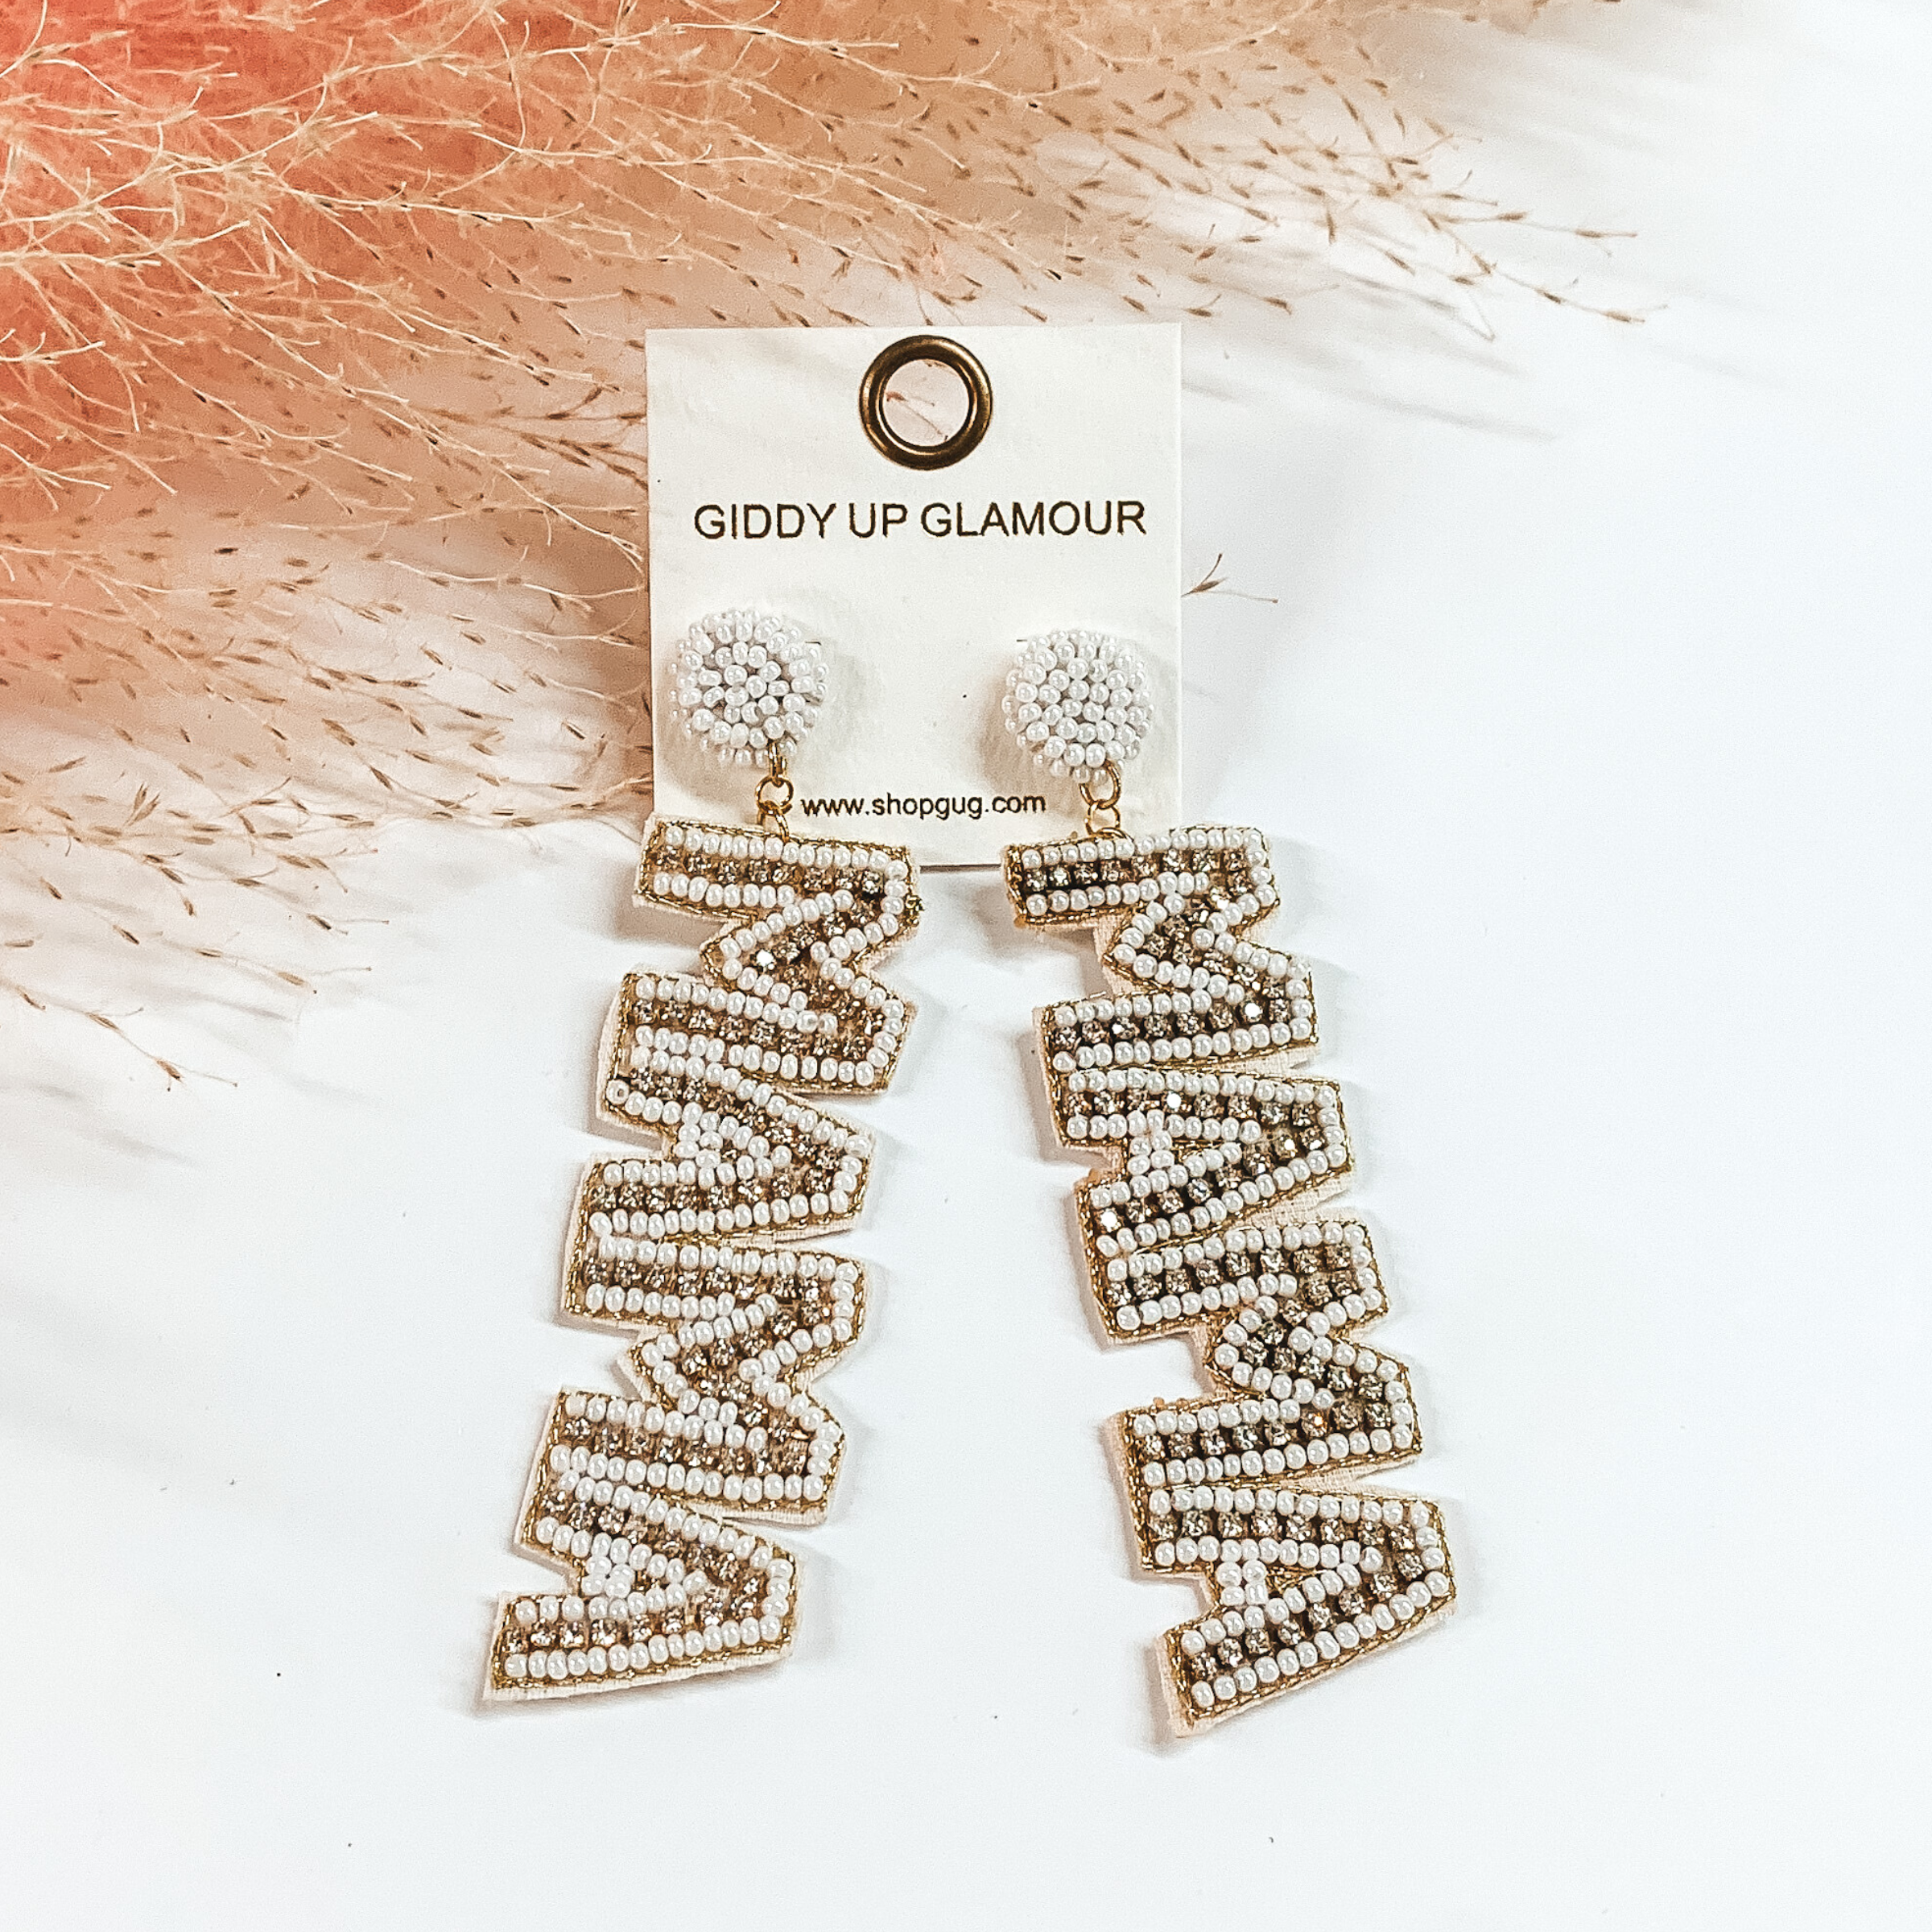 These earrings include white, circle, beaded post back earrings with a long dangle. This dangle spells out "MAMA" in white beads with an inlay of clear crystals. These earrings are pictured on a white background with pink pompous grass at the top. 